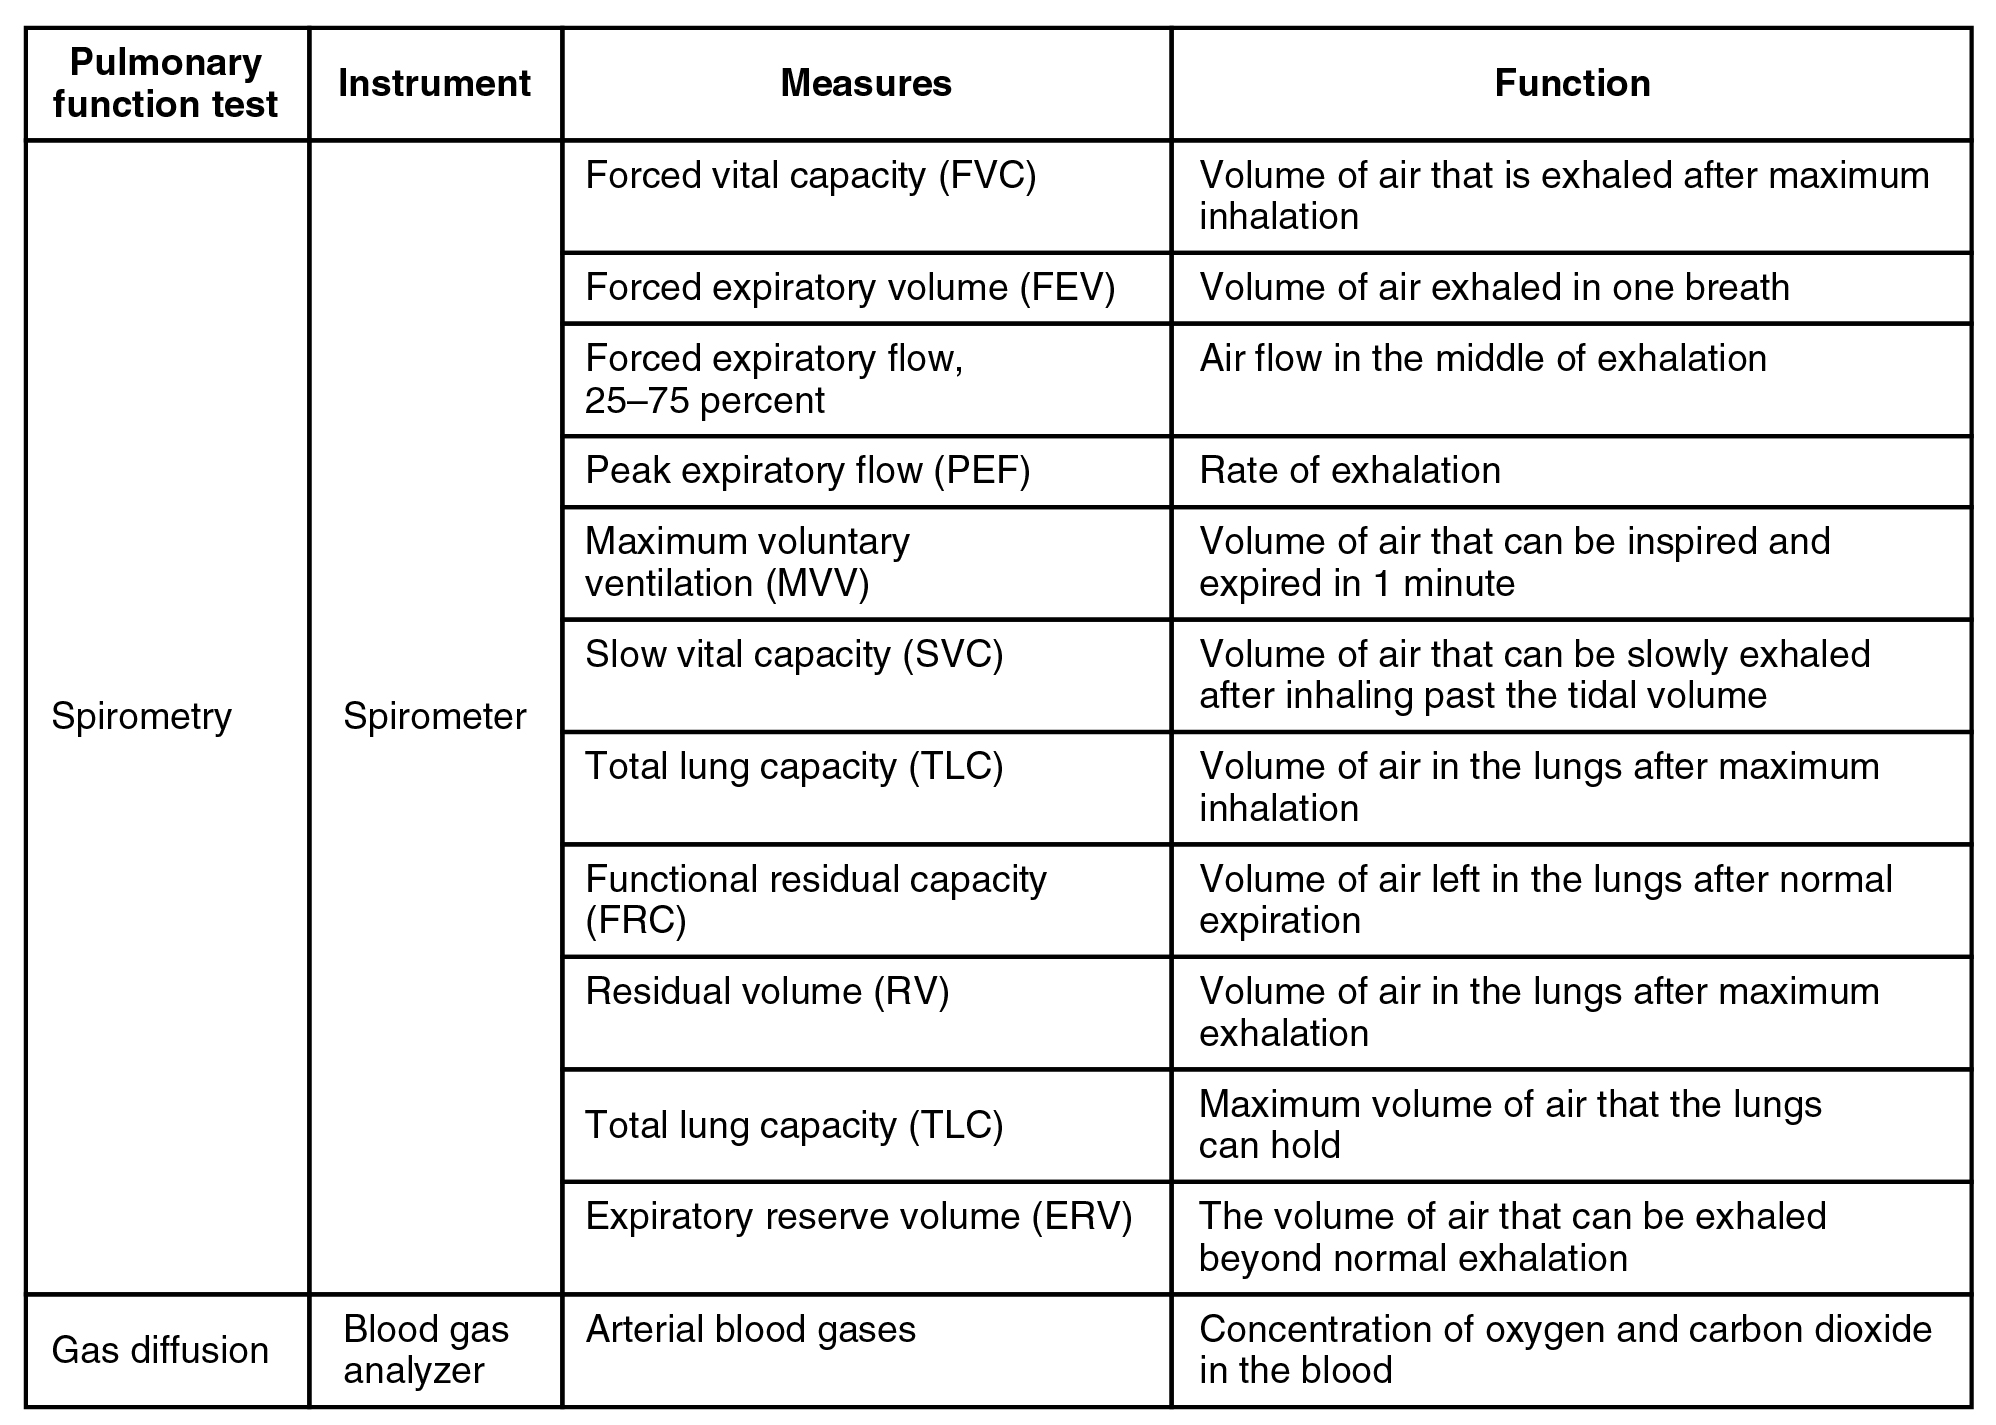 This tables describes methods of pulmonary function testing. Spirometry tests require a spirometer. These tests can measure forced vital capacity (FVC), the volume of air that is exhaled after maximum inhalation; foreced expiratory volume (FEV), the volume of air exhaled in one breath; forced expiratory flow, 25 to 75 percent, the air flow in the middle of exhalation; peak expiratory flow (PEF), the rate of exhalation; maximum voluntary ventilation (MVV), the volume of air that can be inspired and expired in 1 minute; slow vital capacity (SVC), the volume of air that can be slowly exhaled after inhaling past the tidal volume; total lung capacity (TLC), the volume of air in the lungs after maximum inhalation; functional residual capacity (FRC), the volume of air left in the lungs after normal expiration; residual volume (RV), the volume of air in the lungs after maximum exhalation; total lung capacity (TLC), the maximum volume of air that the lungs can hold; and expiratory reserve volume (ERV), the volume of air that can be exhaled beyond normal exhalation. Gas diffusion tests require a blood gas analyzer. These tests can measure arterial blood gases, the concentration of oxygen and carbon dioxide in the blood.